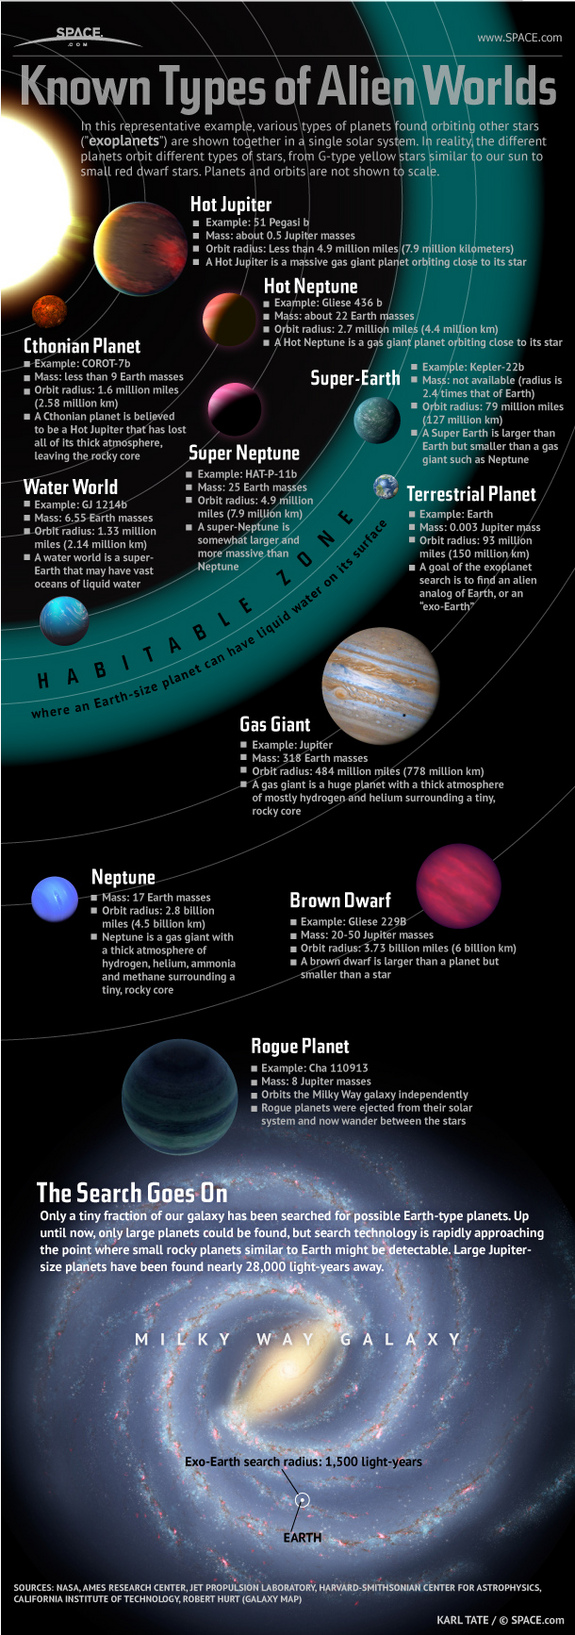 Learn about the weird kinds of alien planets that orbit other stars in this SPACE.com infographic.